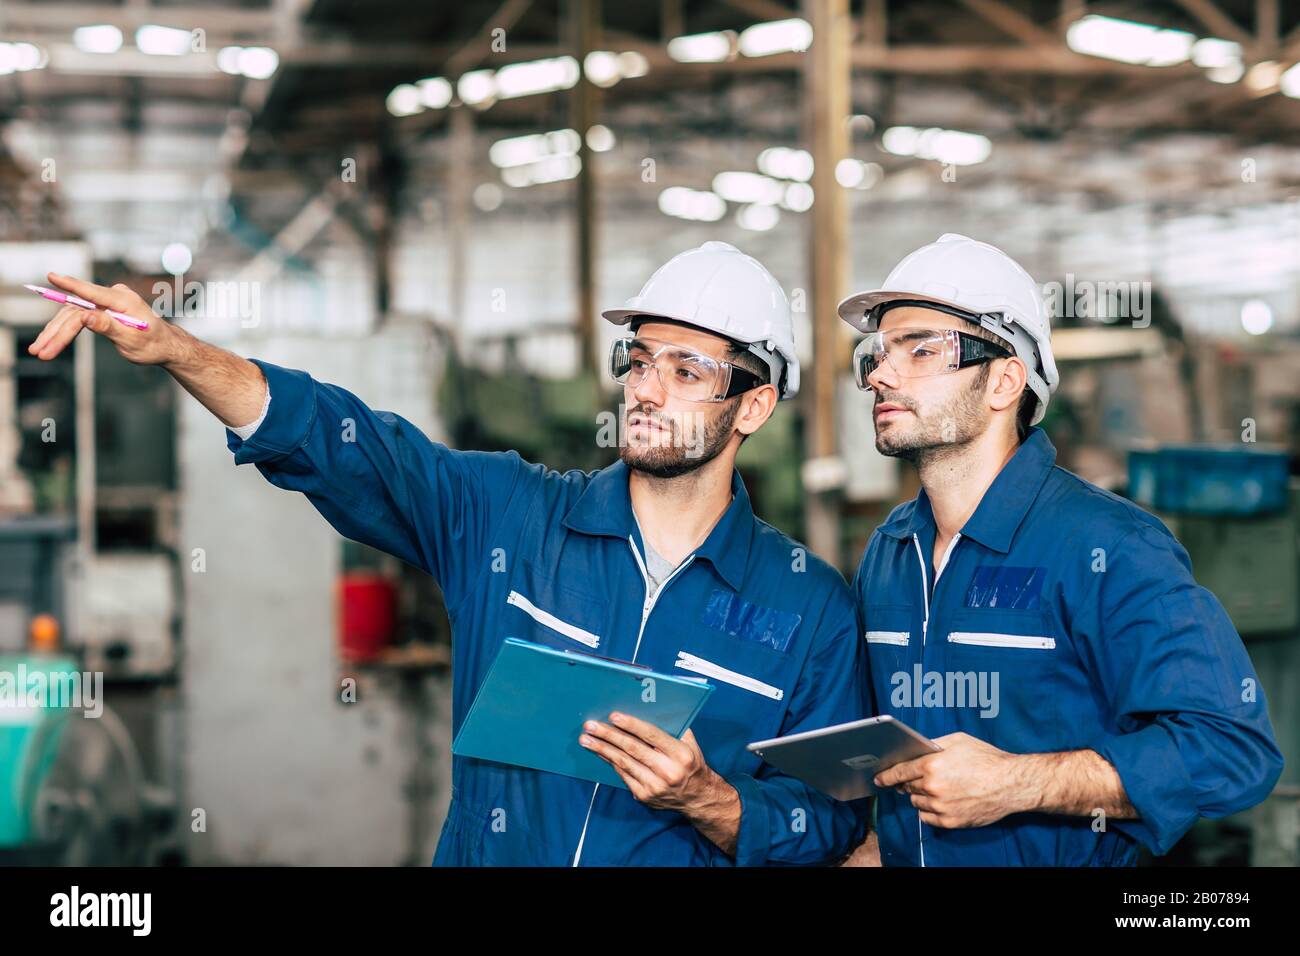 professional technician engineer with safety helmet hard hat working in  industrial manufacturing factory, men at work to checking equipment of  machinery production technology or construction operating Stock Photo